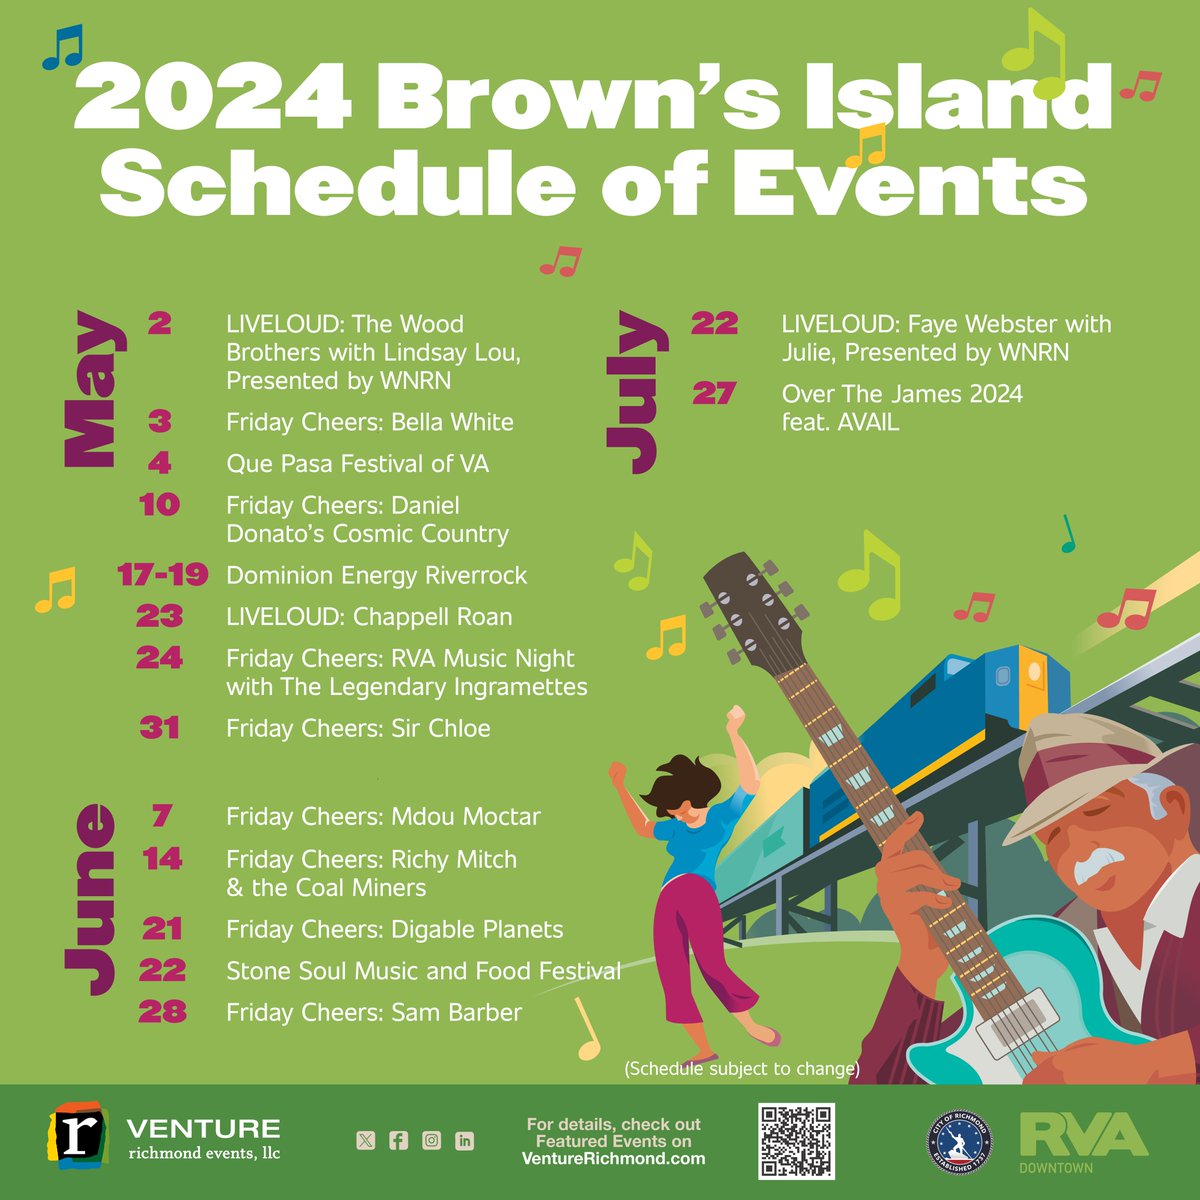 Event season on Brown's Island is HERE! ☀️🍻🎶 From concerts to festivals and everything in between, there's something for everyone to enjoy on the island! venturerichmond.com/our-events